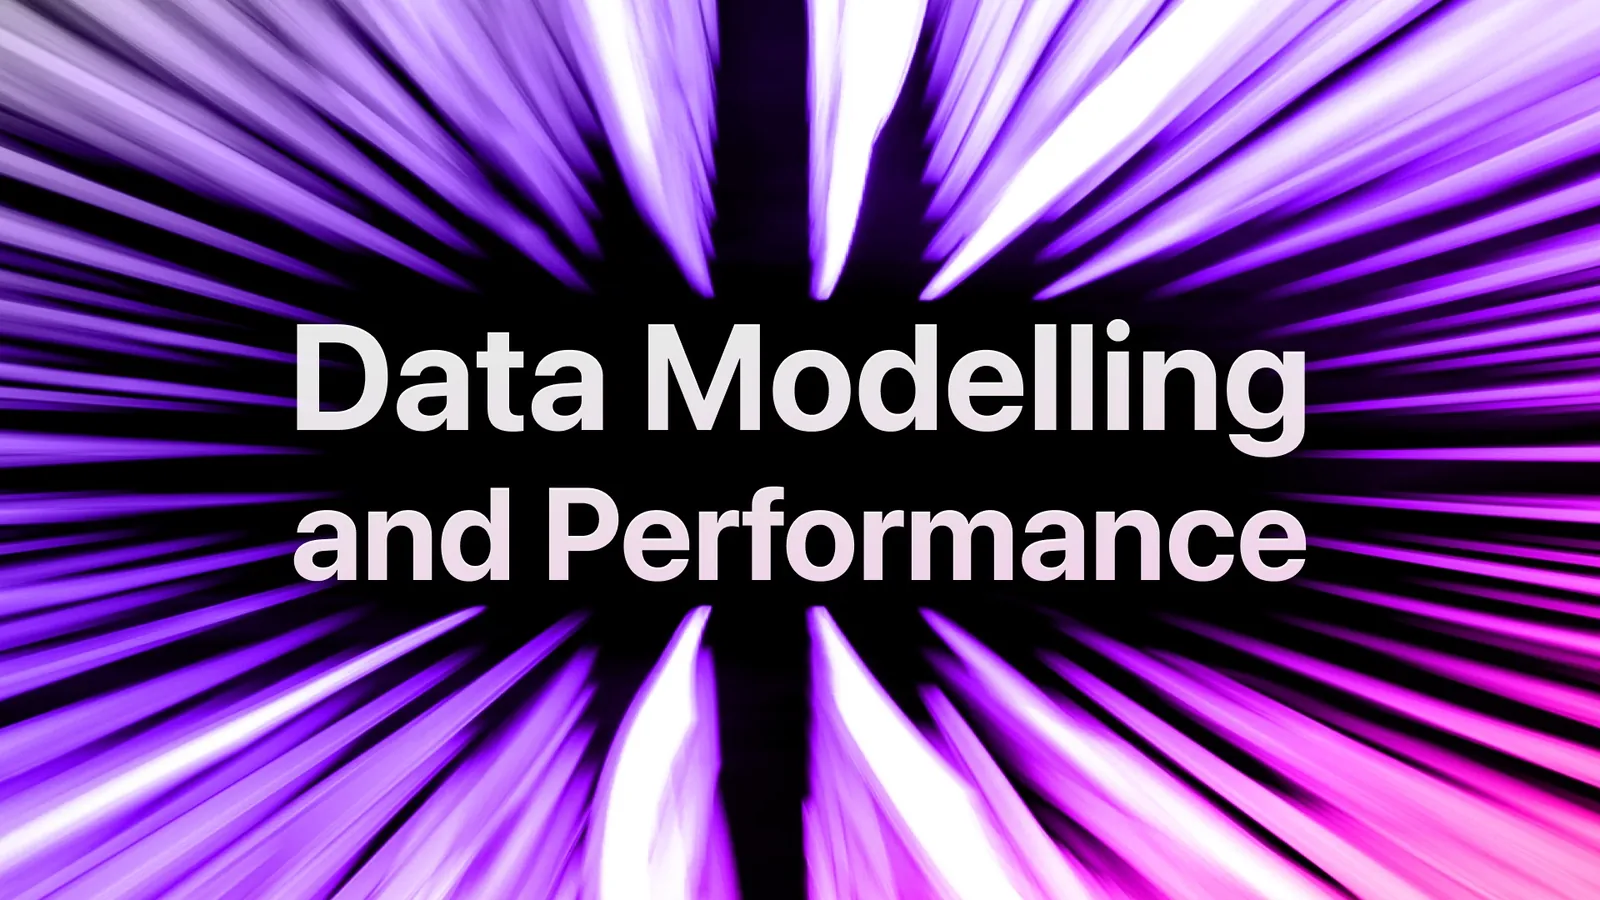 Data Modelling and Performance